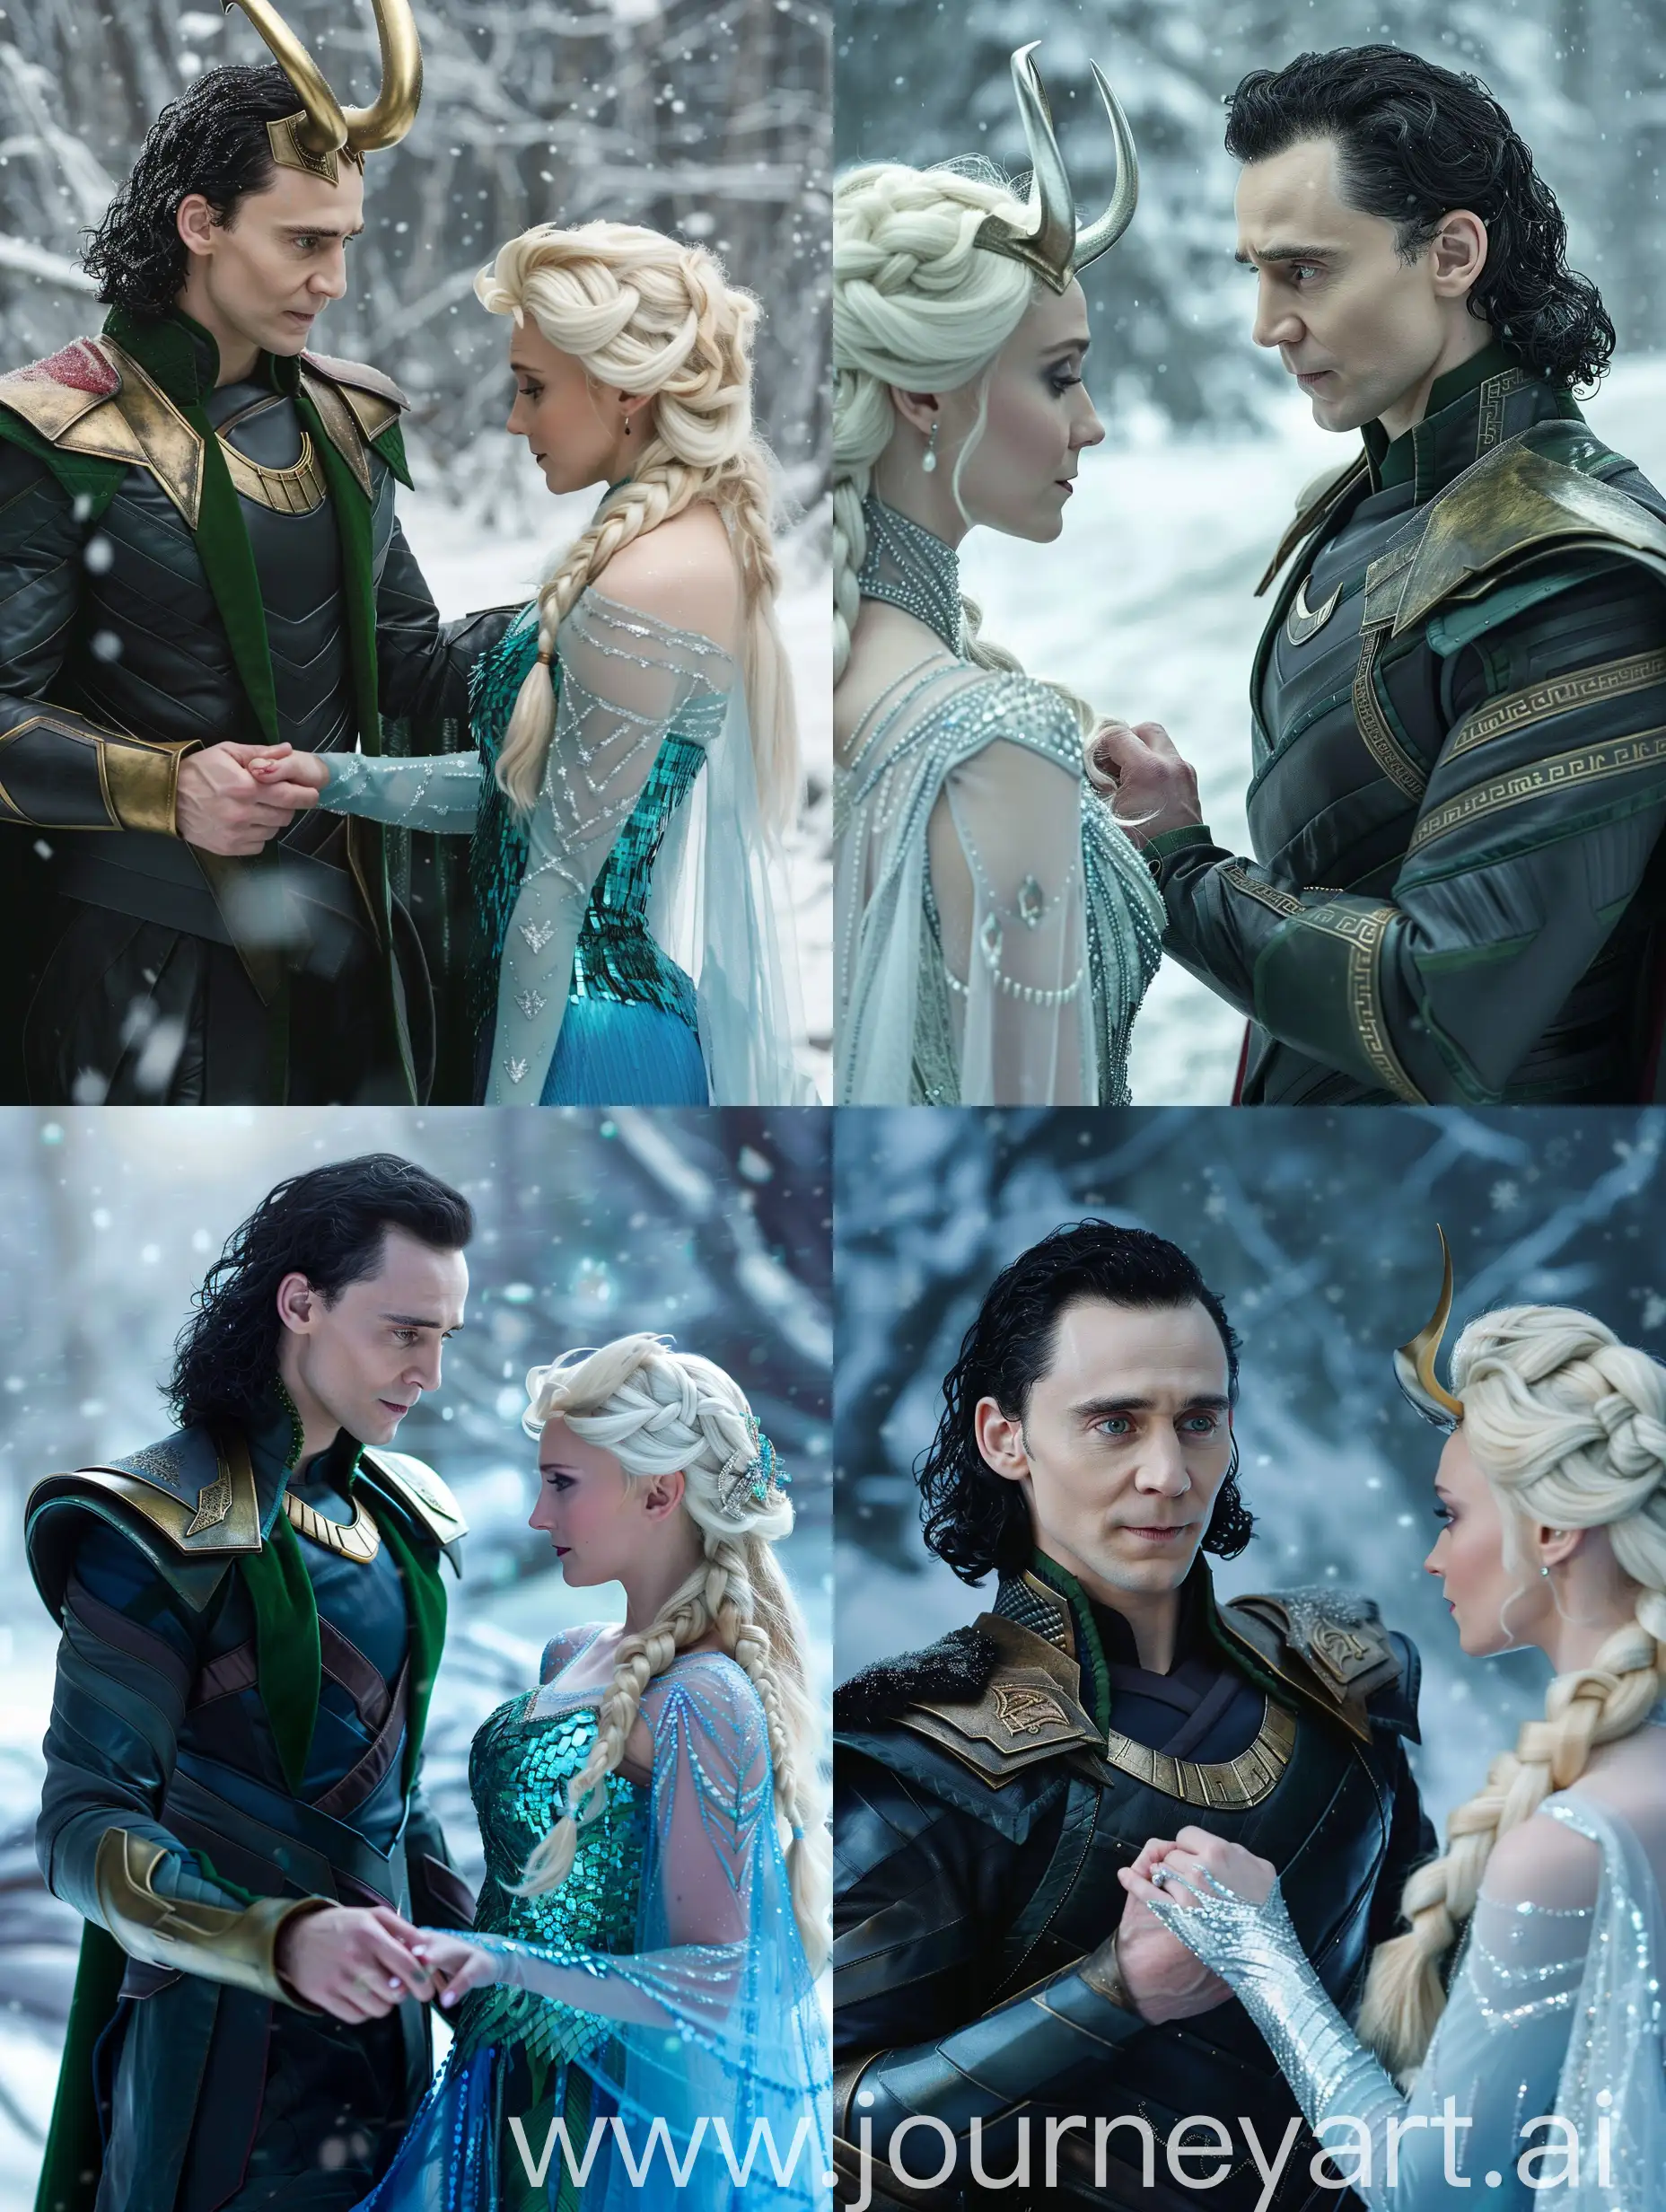 Tom-Hiddleston-as-Loki-Holds-Hands-with-Elsa-in-Romantic-Gesture